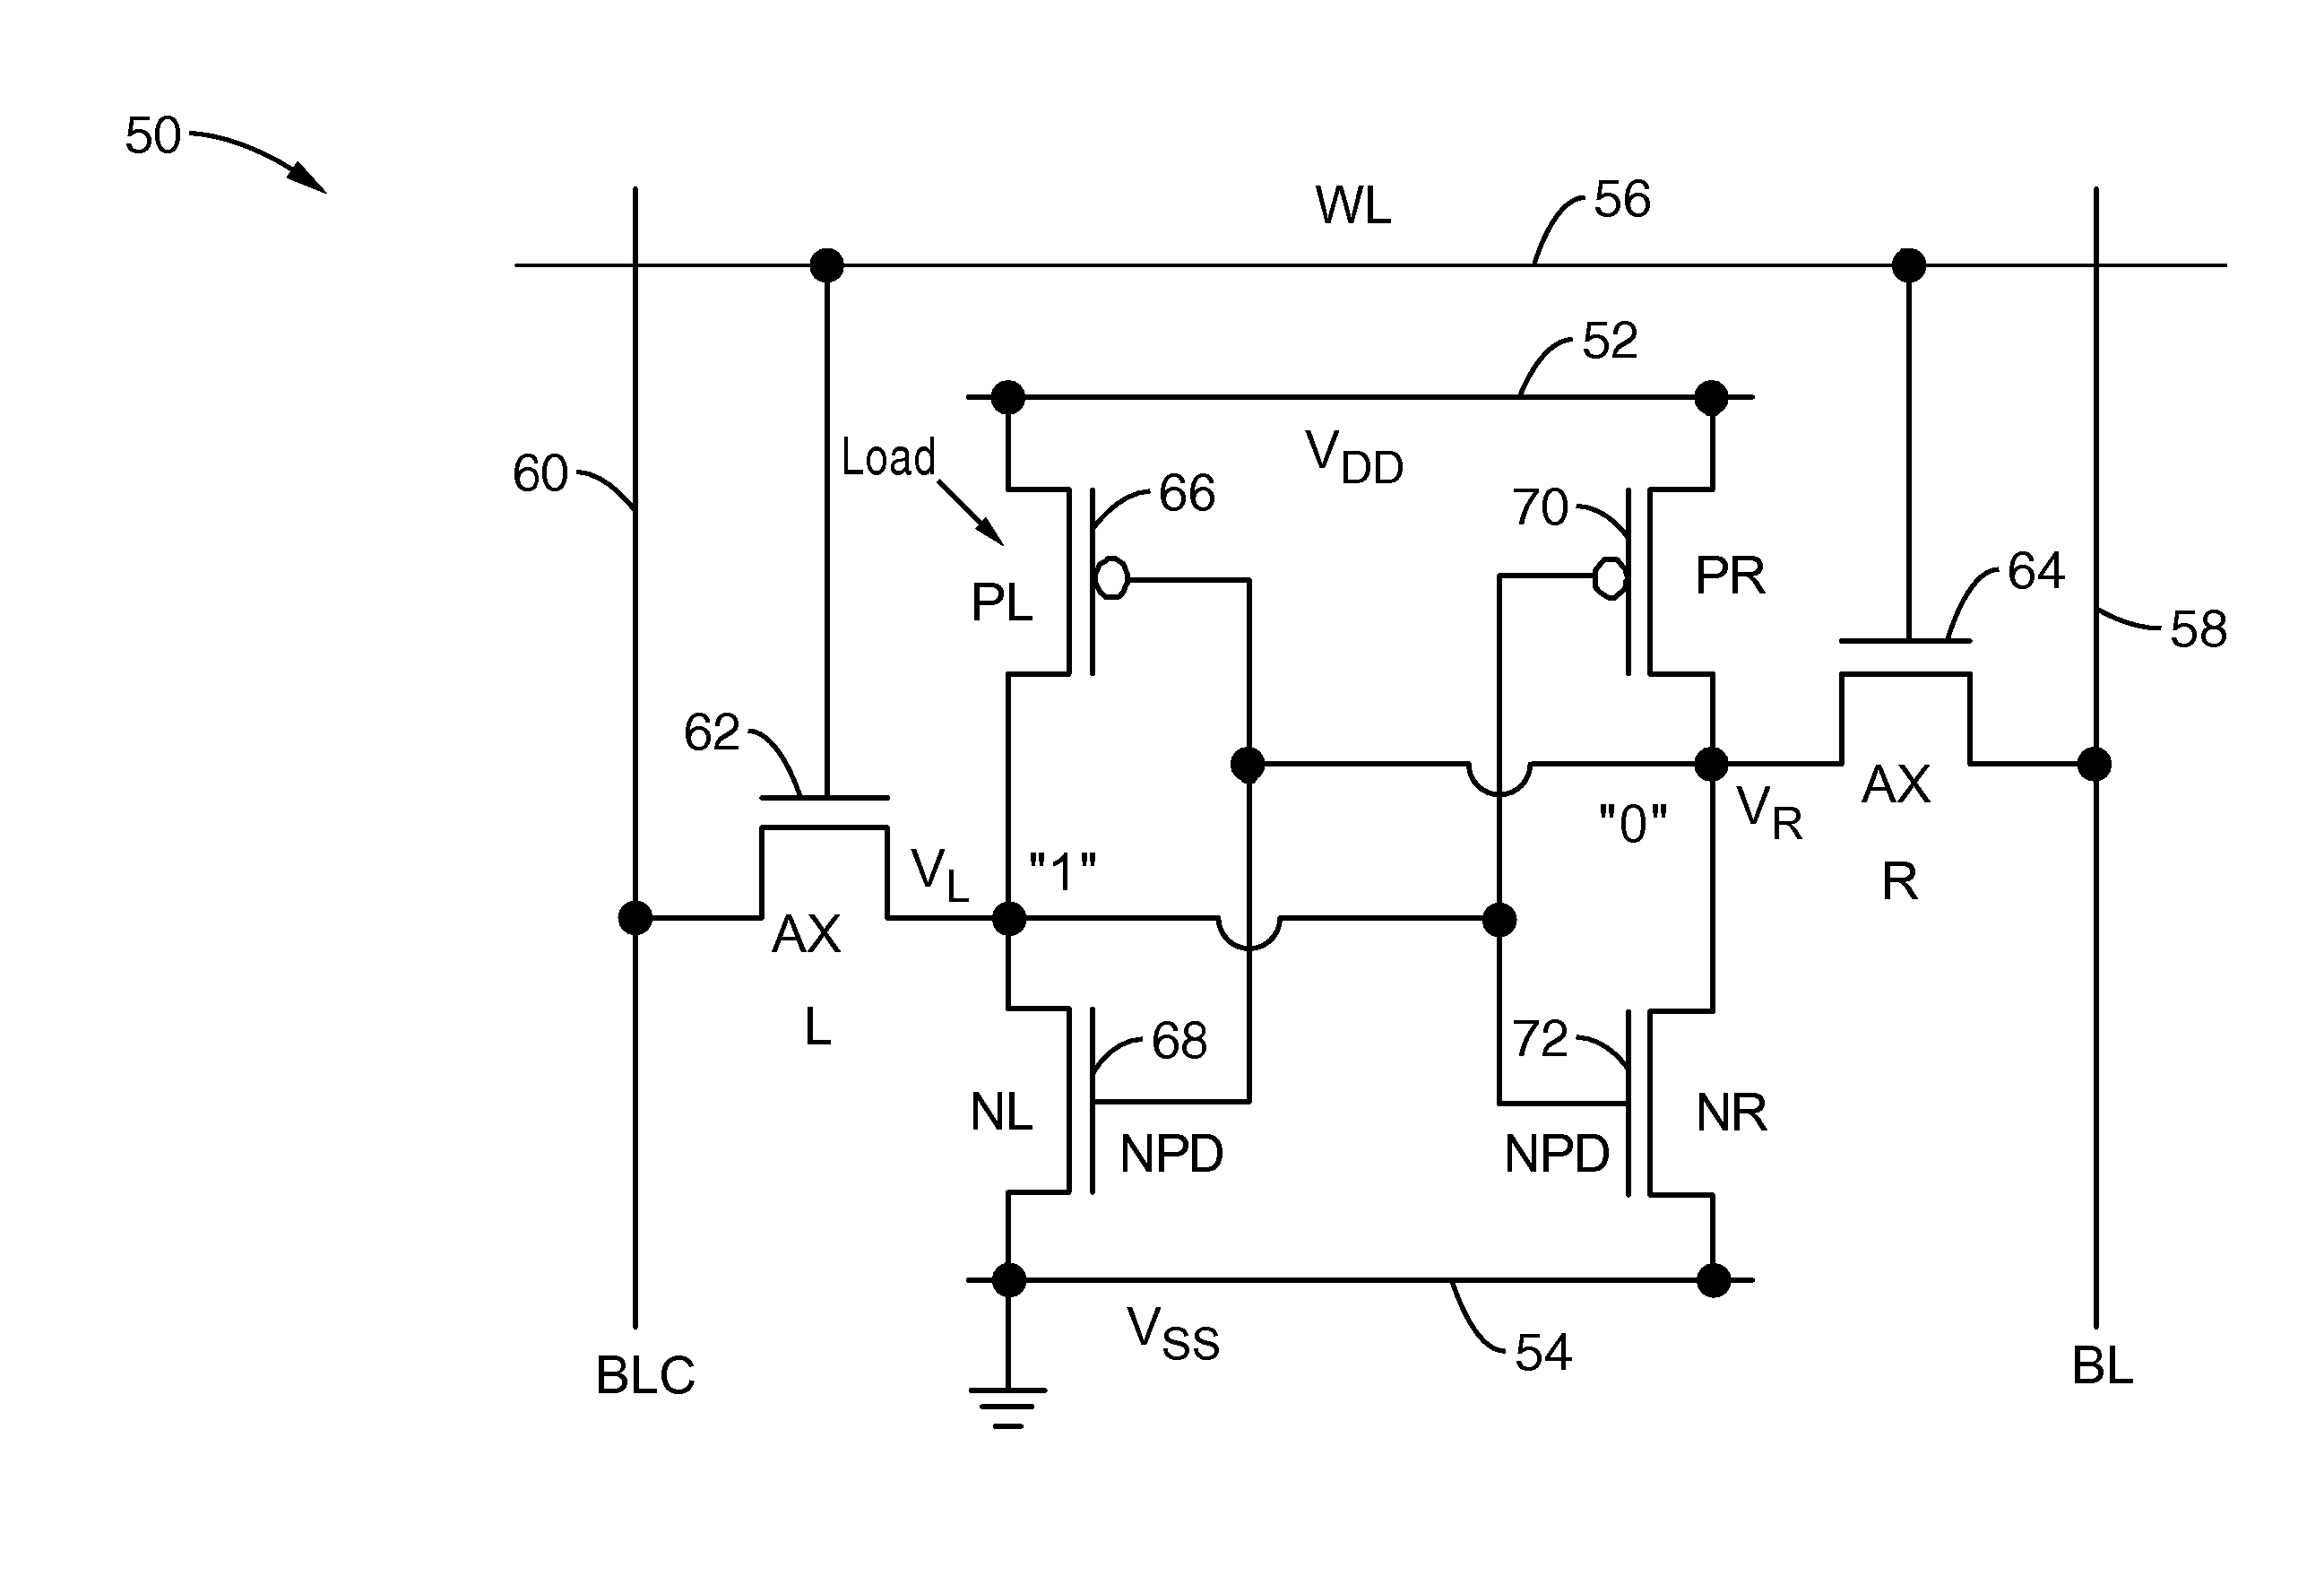 Finfet-based SRAM with feedback